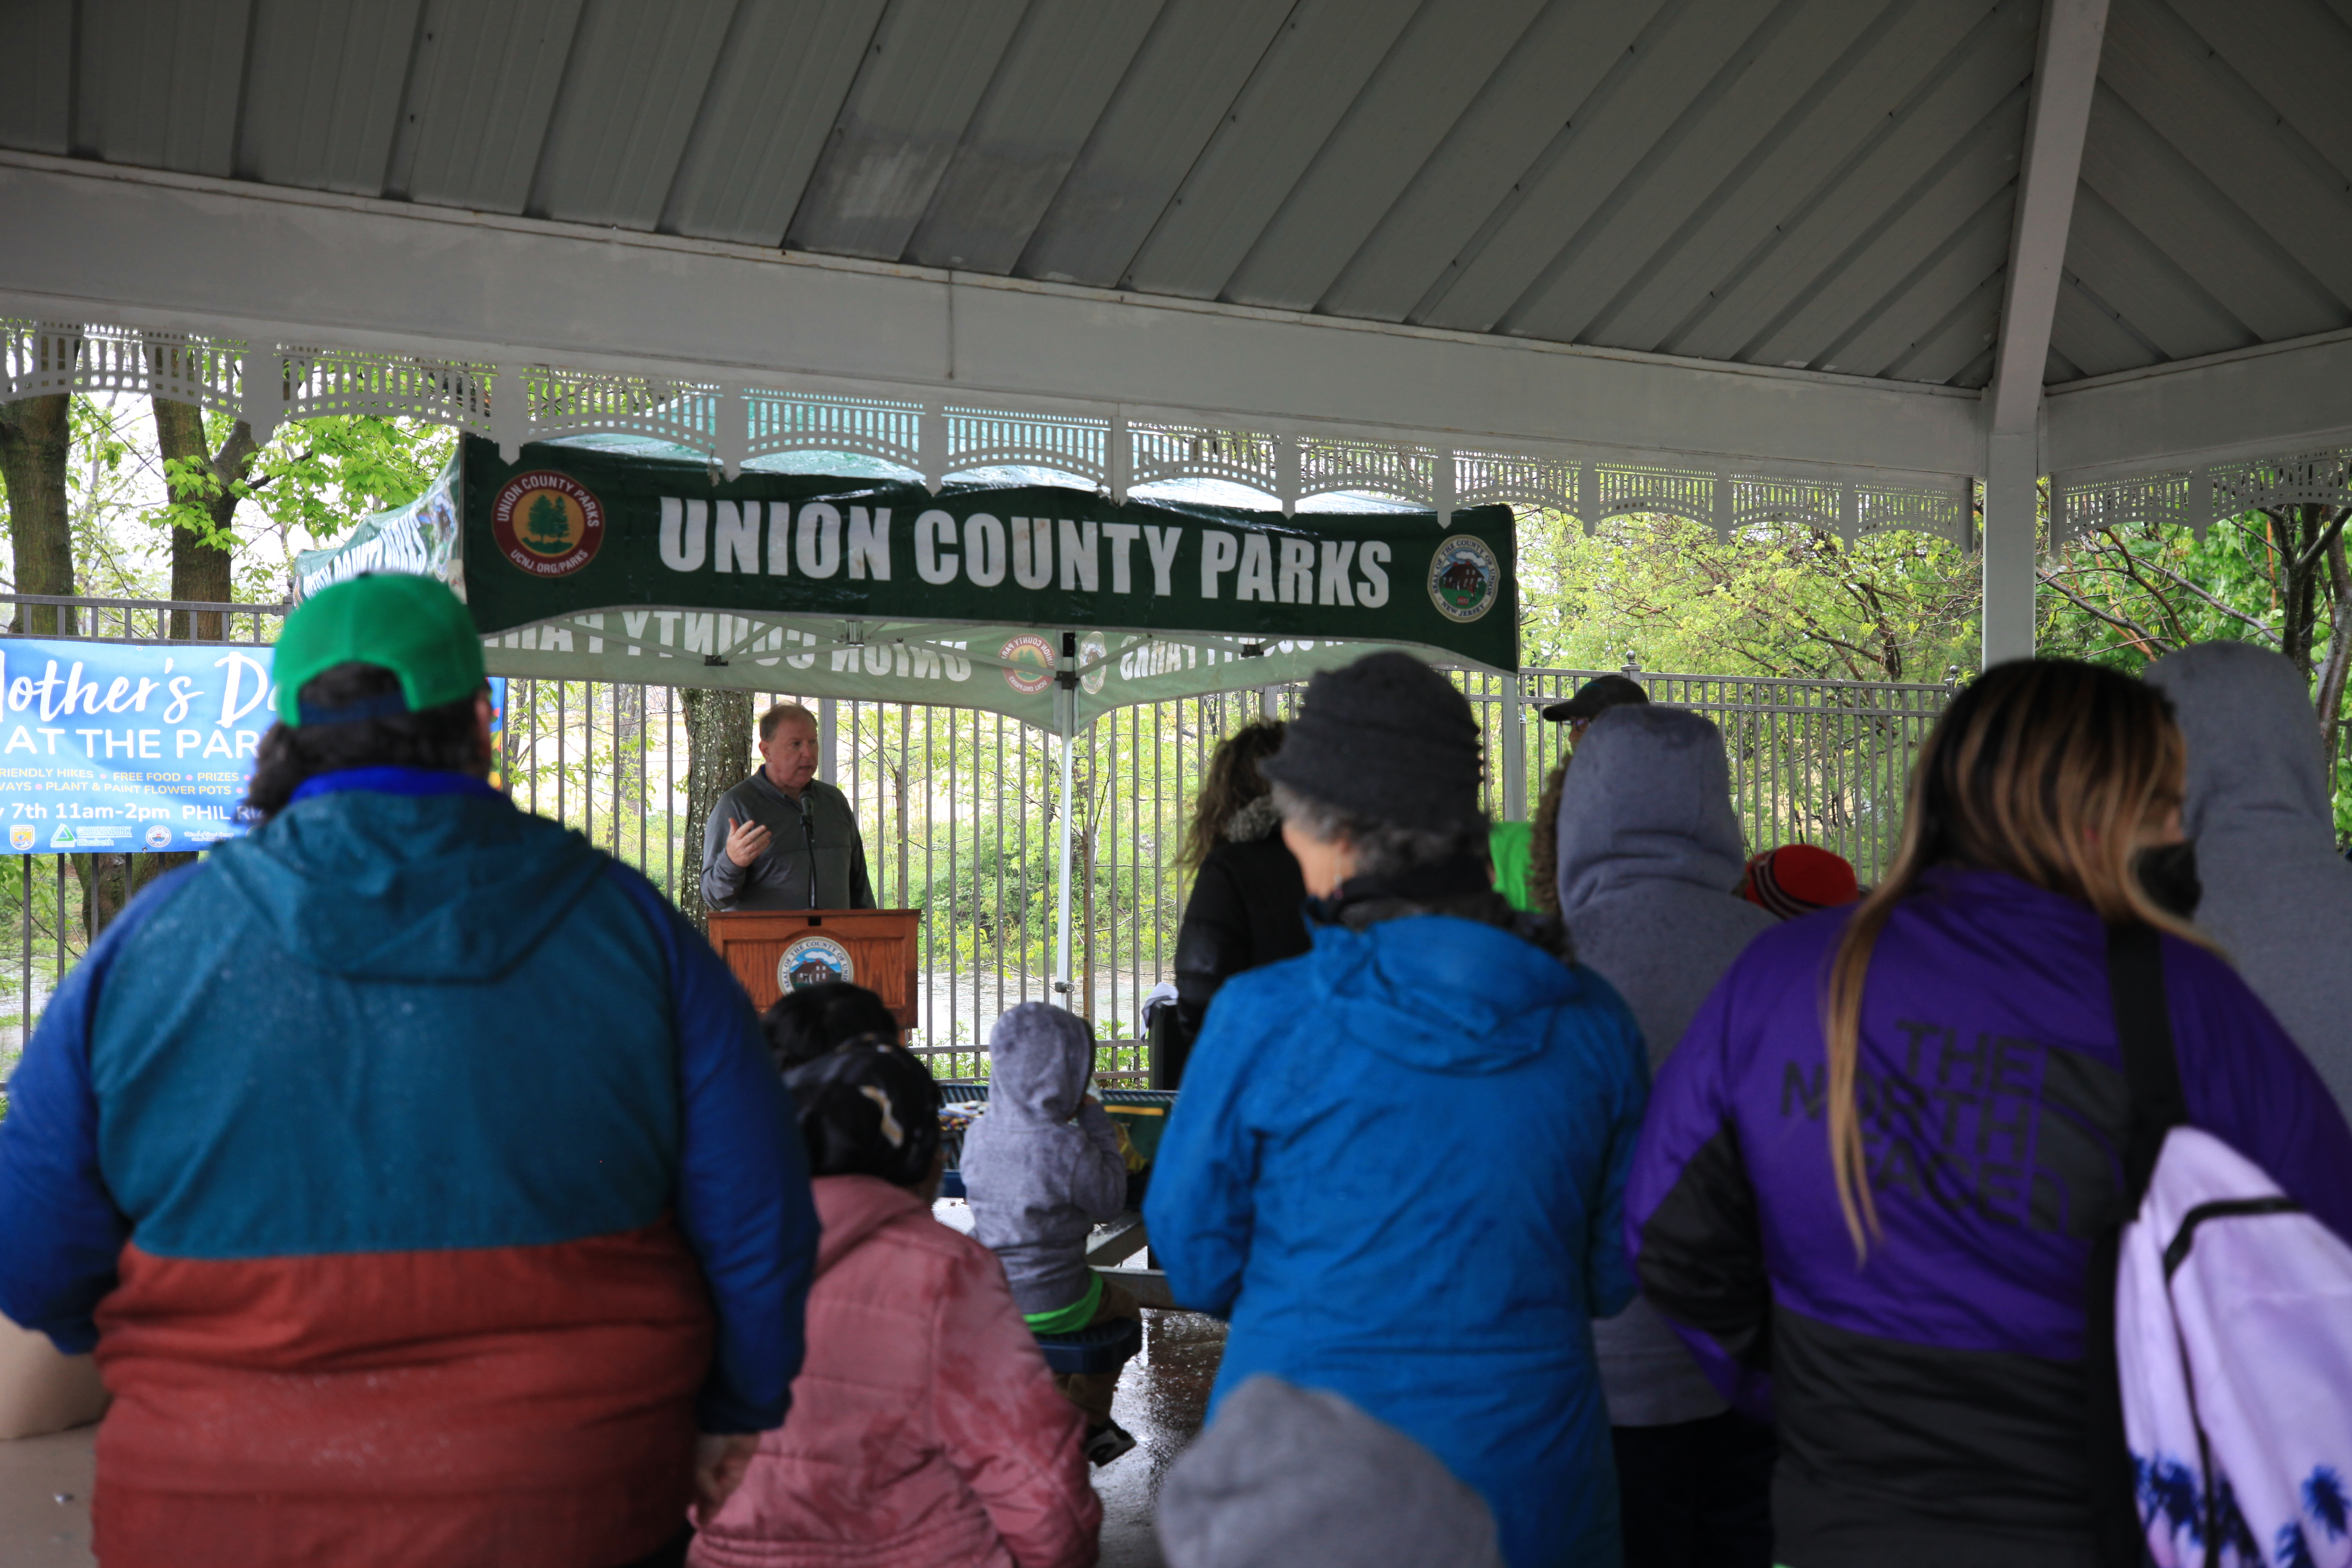 a man speaks at a podium in front of a crowd of people. A tent banner above him reads "UNION COUNTY PARKS"